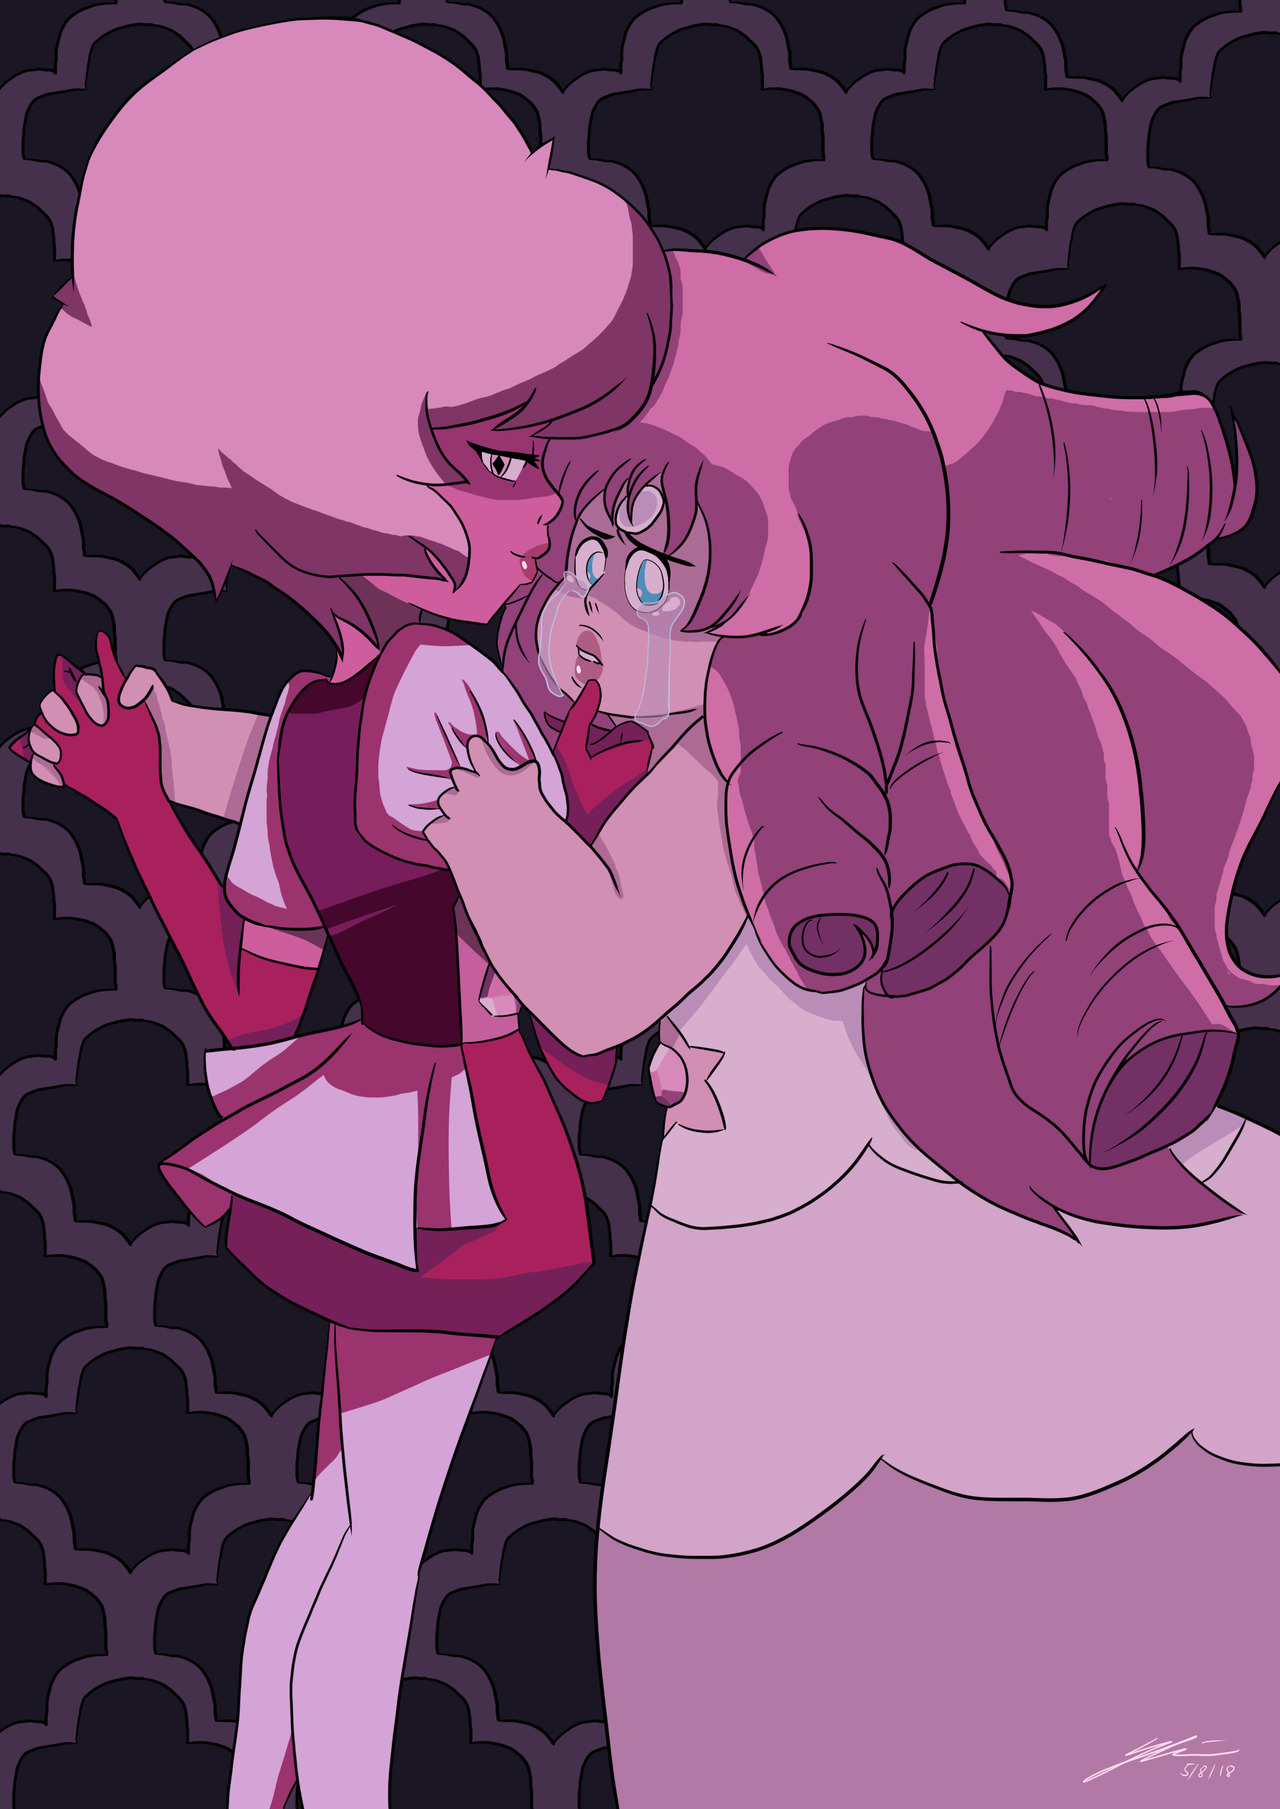 “Rose Quartz is a really awful person”